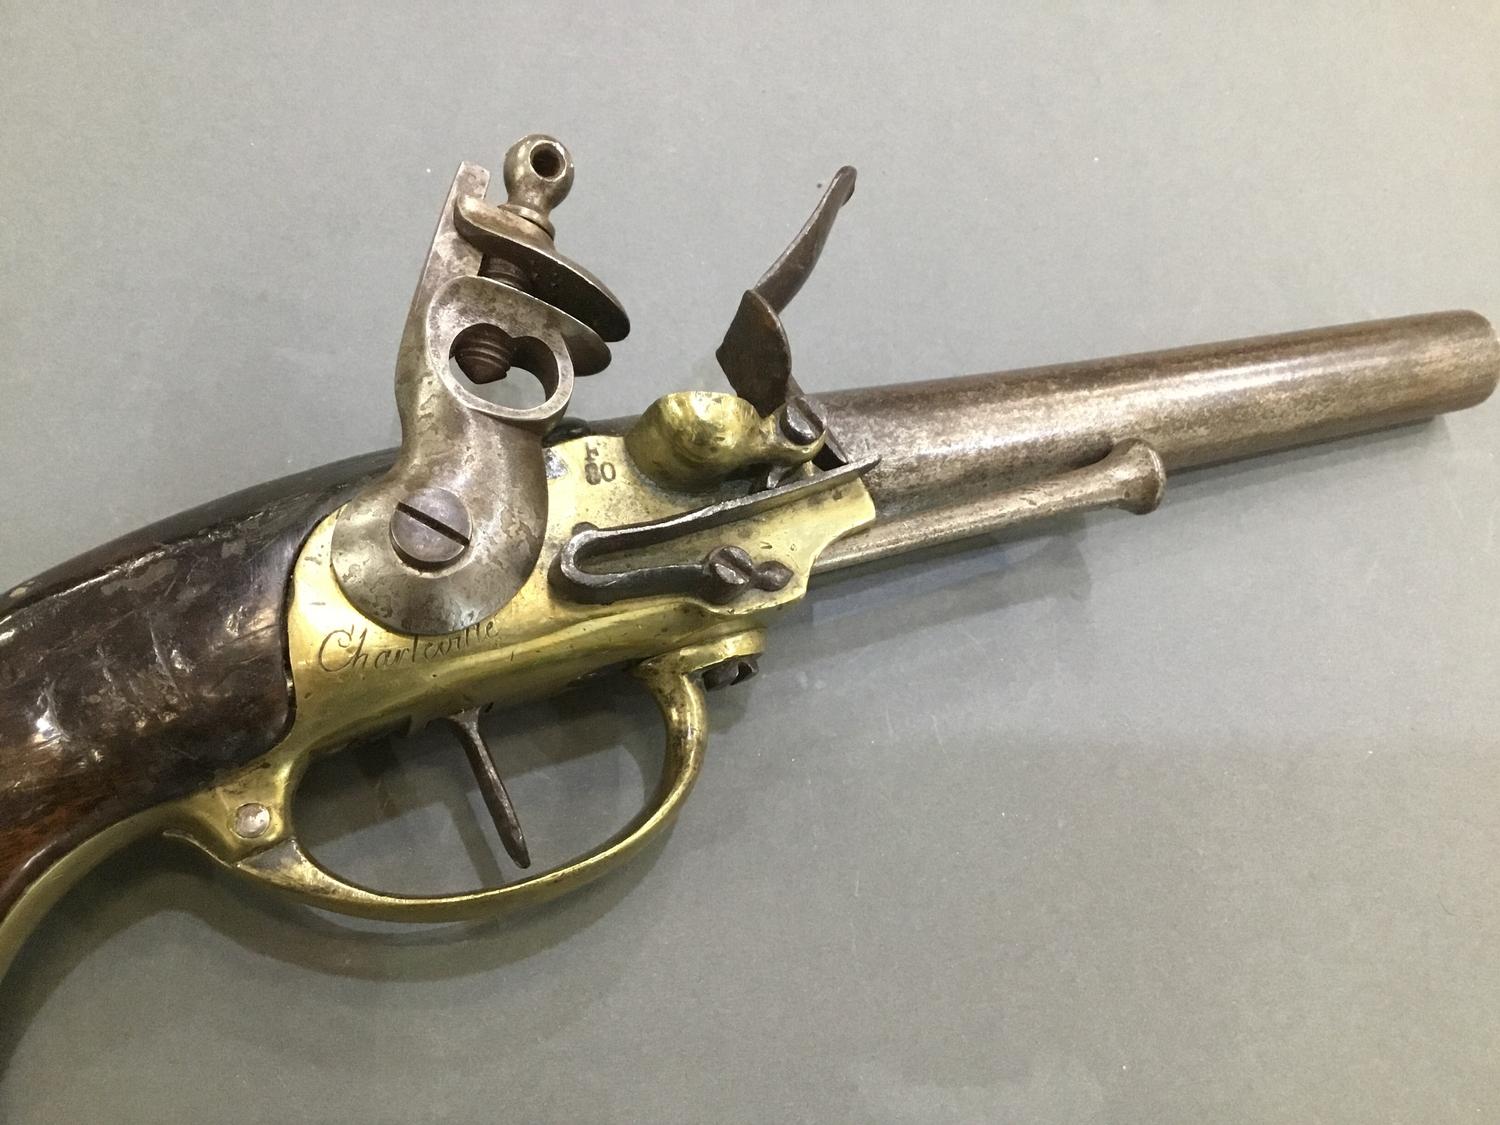 An early 19th Century French Flinlock pistol engraved 'Charleville' stamped 'F80' - Image 2 of 4